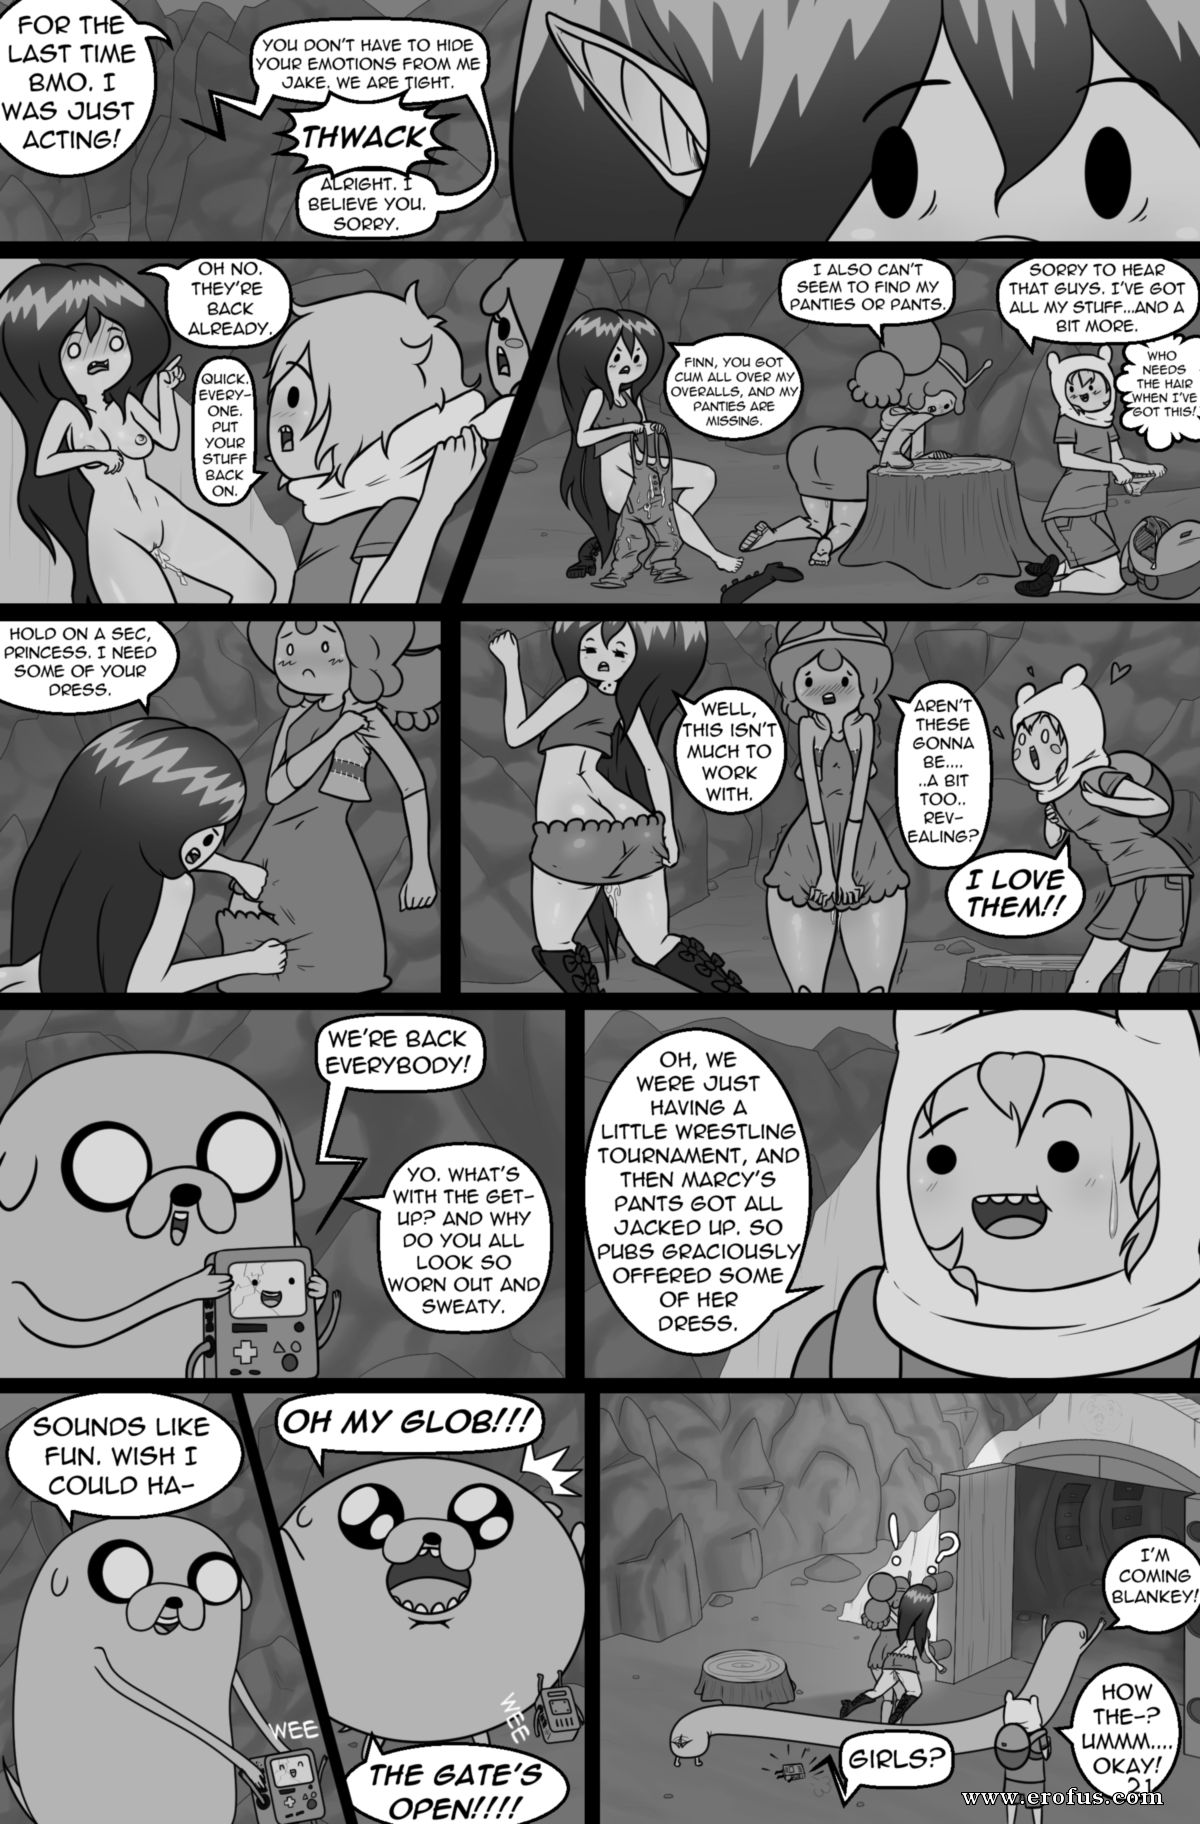 Misadventure Time Porn - Page 24 | various-authors/cubbychambers/misadventure-time ...